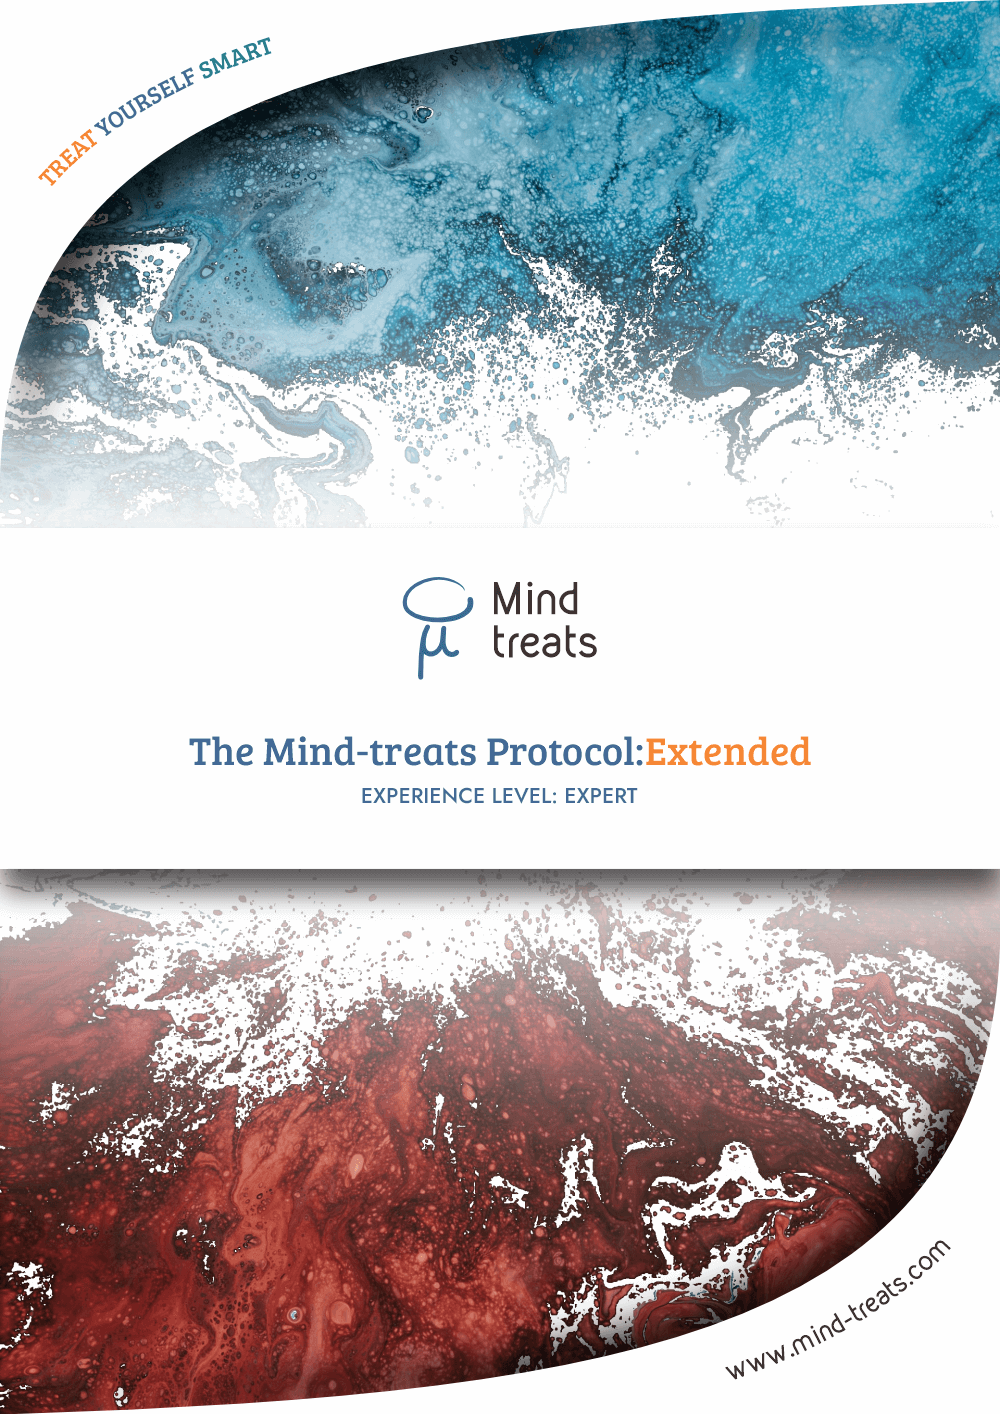 mind-treats protocol extended cover image